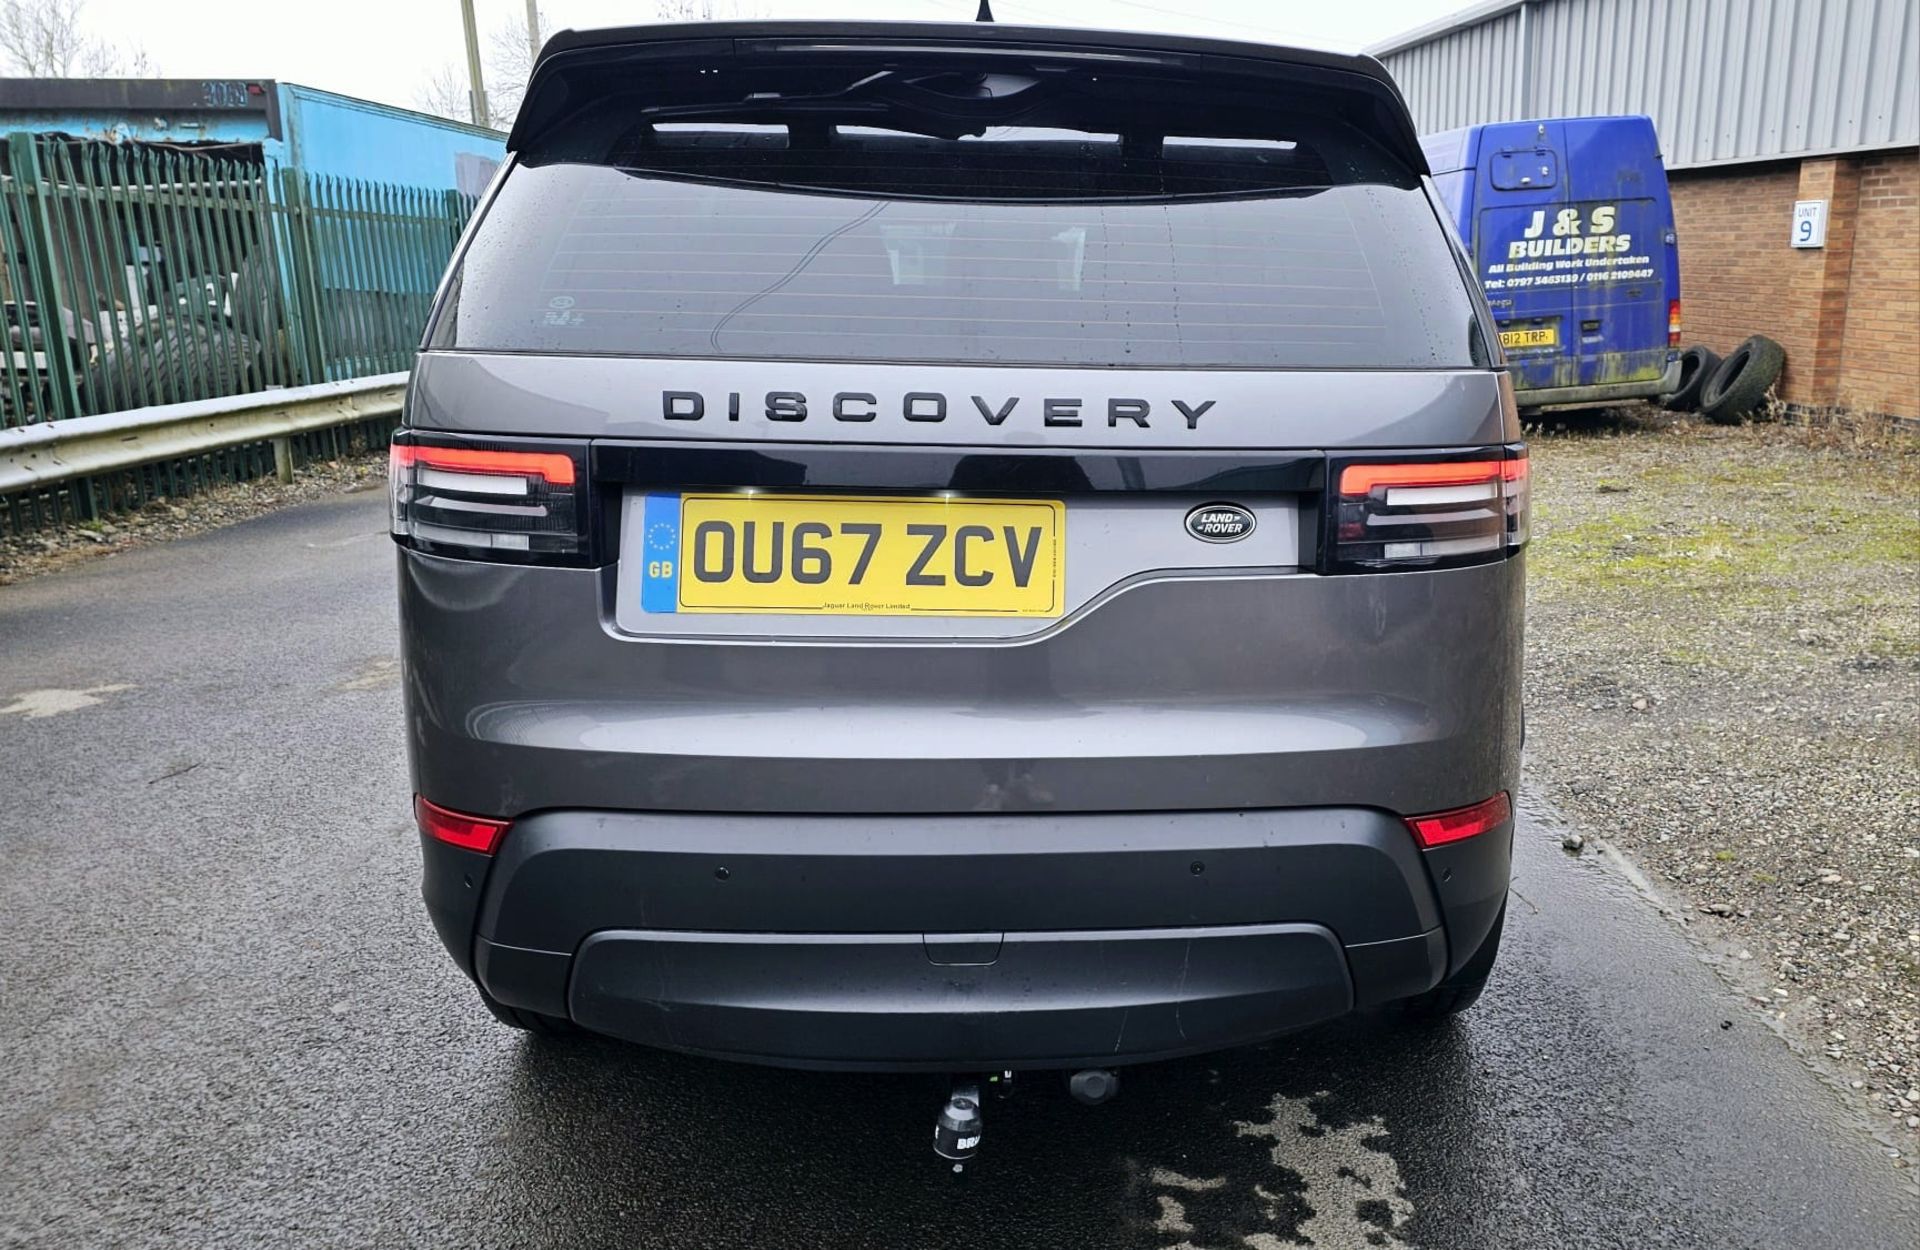 Land Rover Discovery 5 - (New Model) Diesel Auto - 2018 Model - Black Pack Edition - Sat Nav - Look - Image 12 of 45